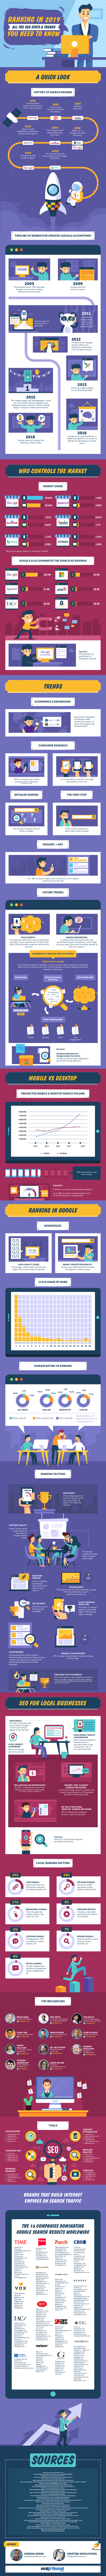 Inforgraphic showing SEO stats and trends